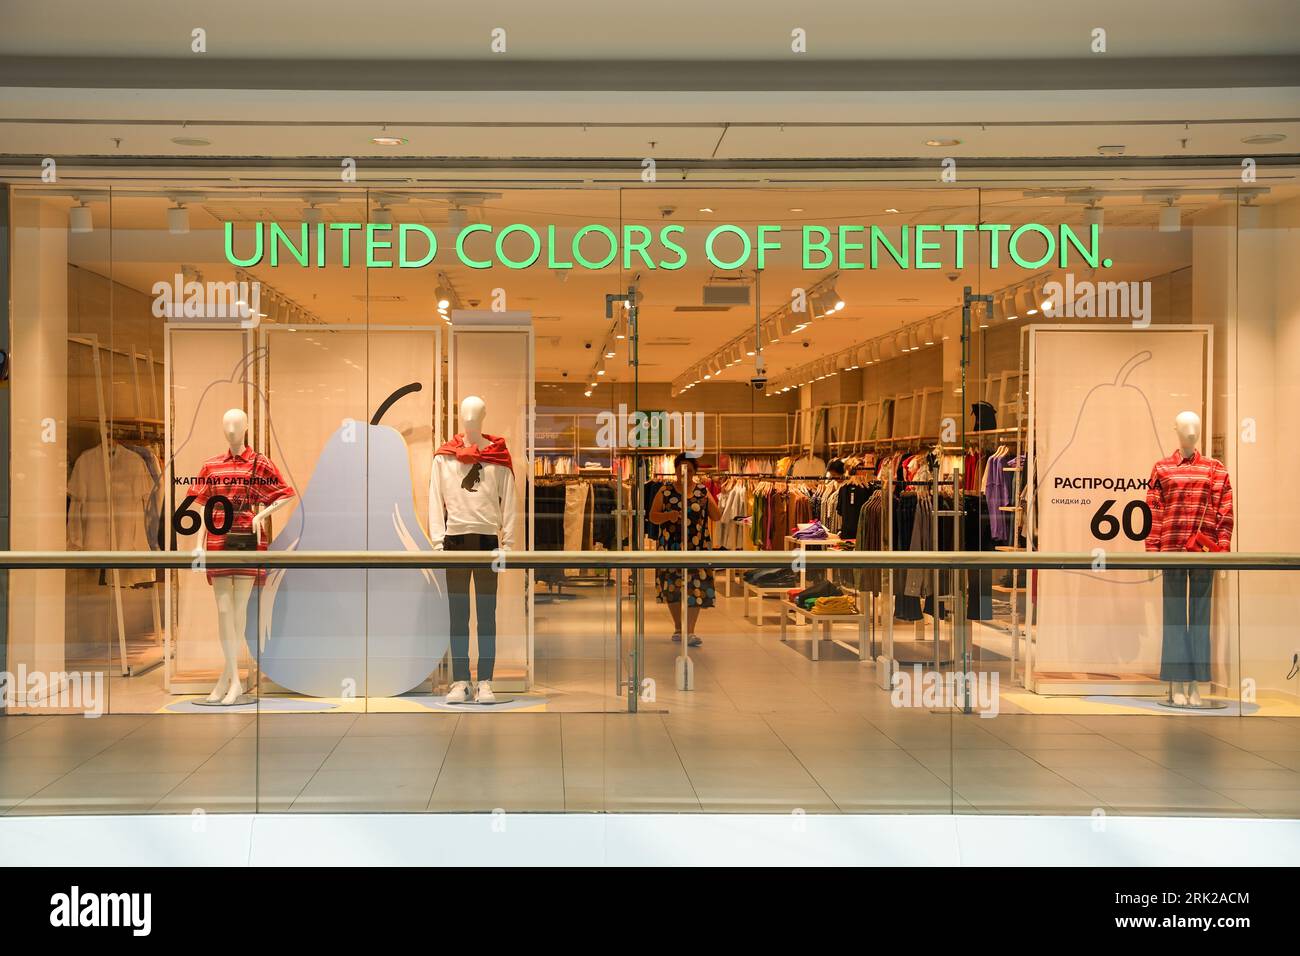 Almaty, Kazakhstan - August 17, 2023: United Colors Of Benetton retail store in a shopping mall. Clothing brand Stock Photo